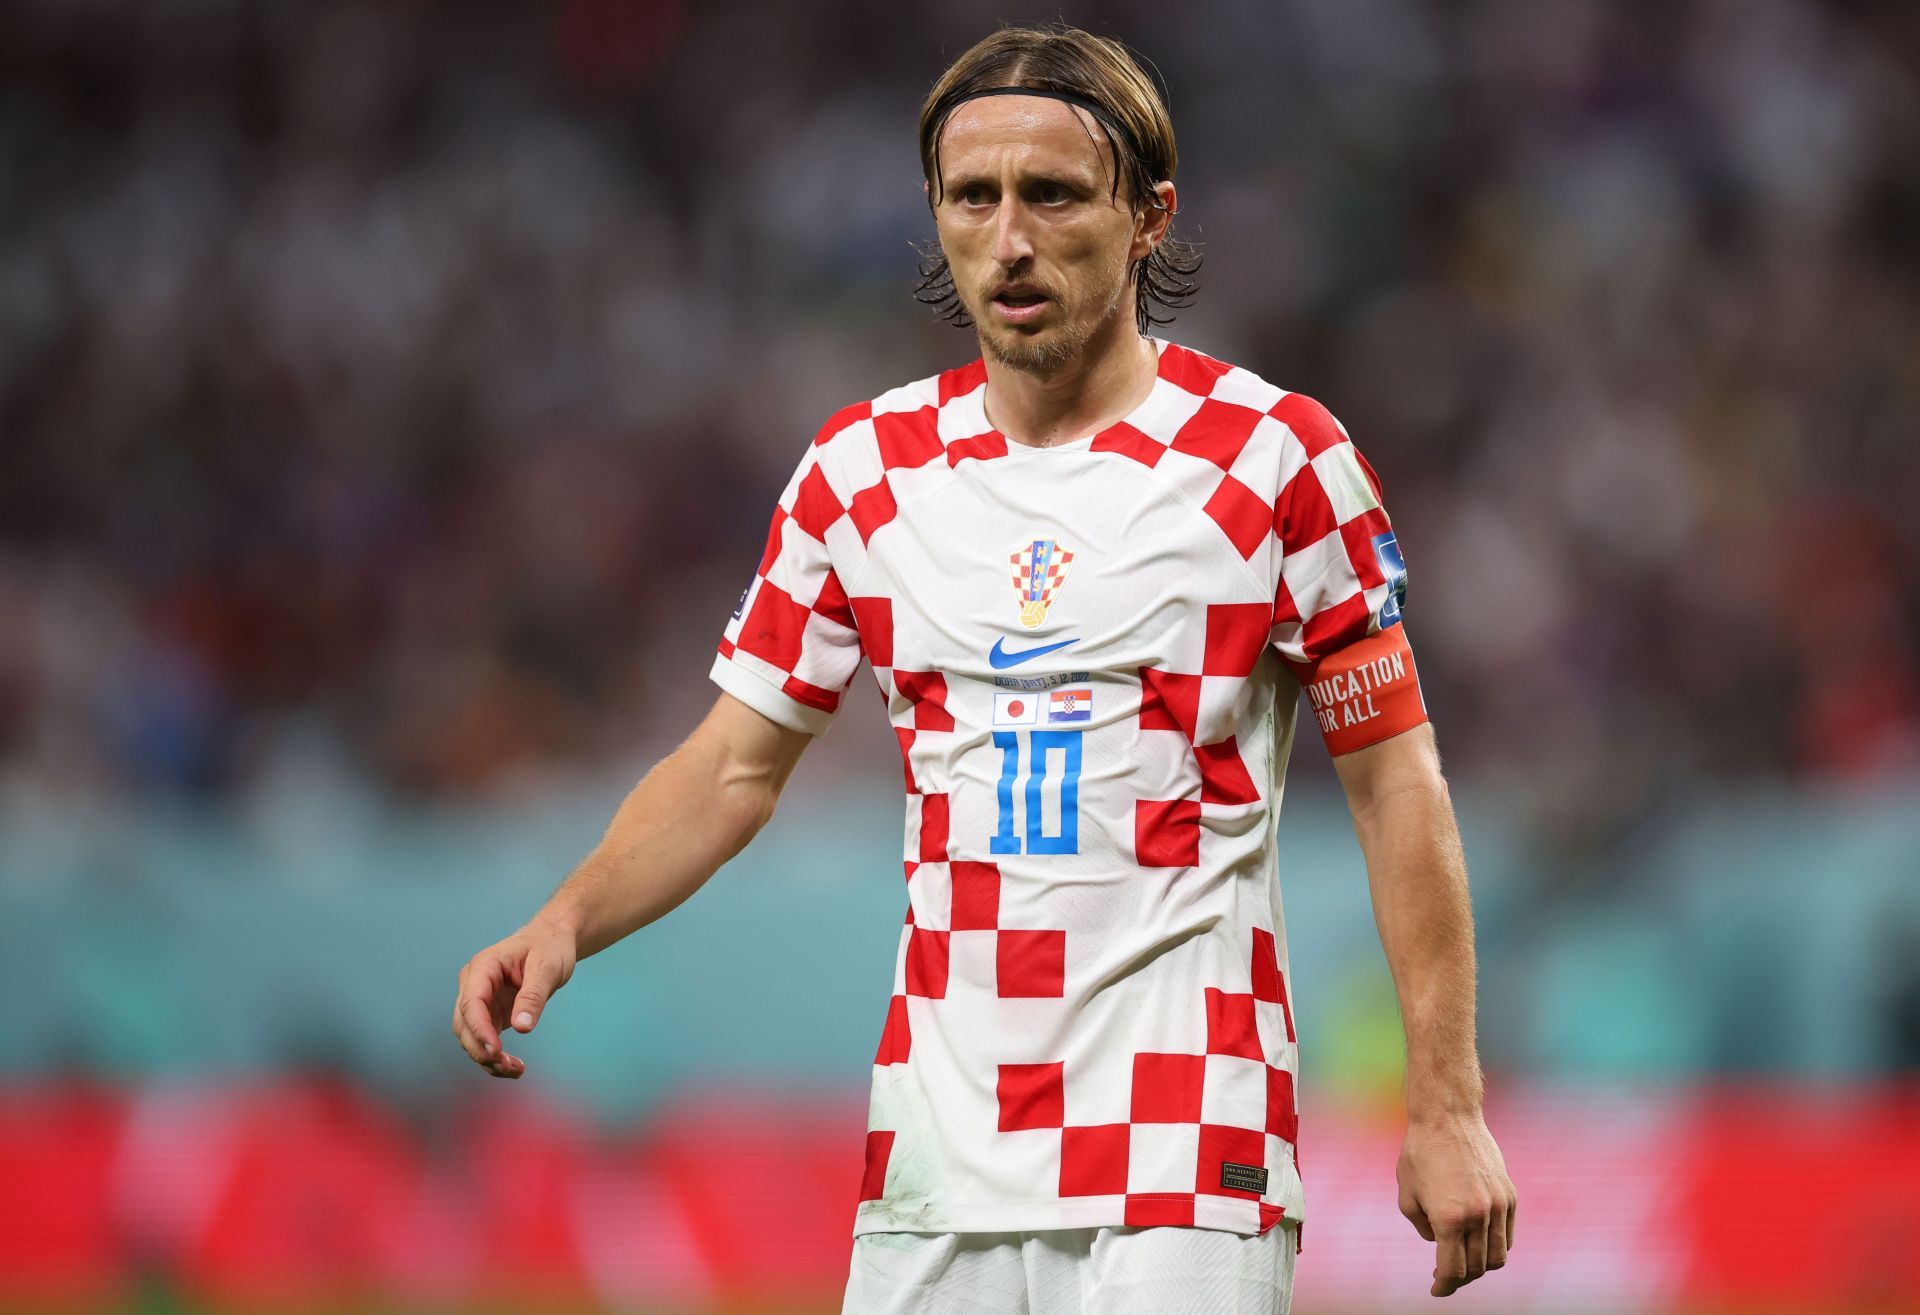 Luka Modric is enjoying another impressive spell with Croatia in the World Cup.